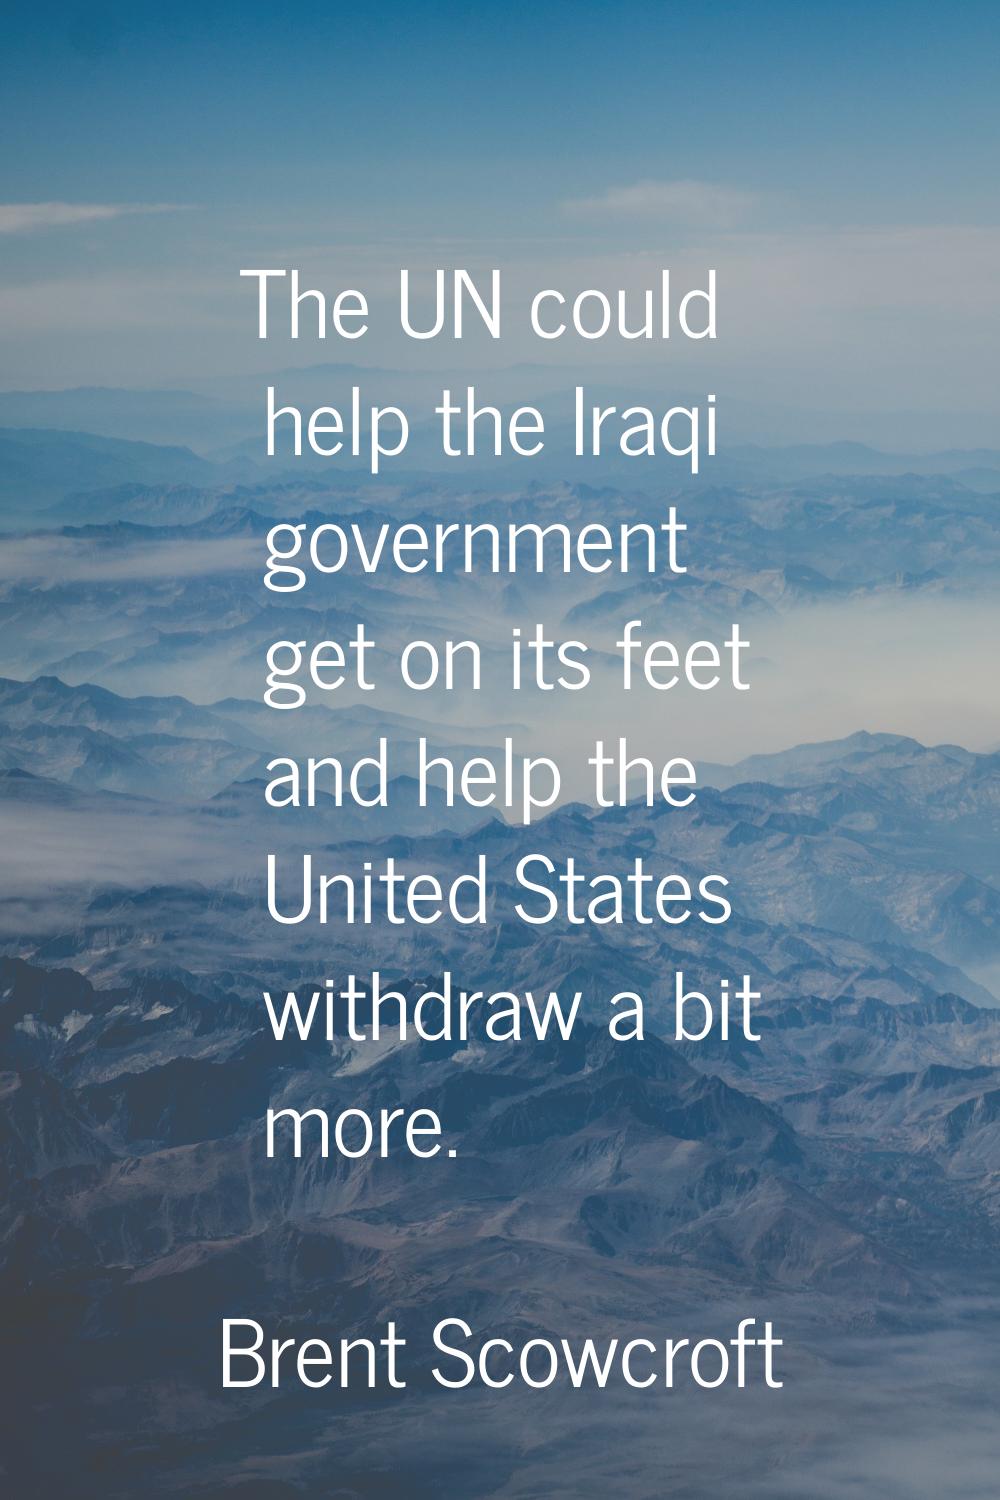 The UN could help the Iraqi government get on its feet and help the United States withdraw a bit mo